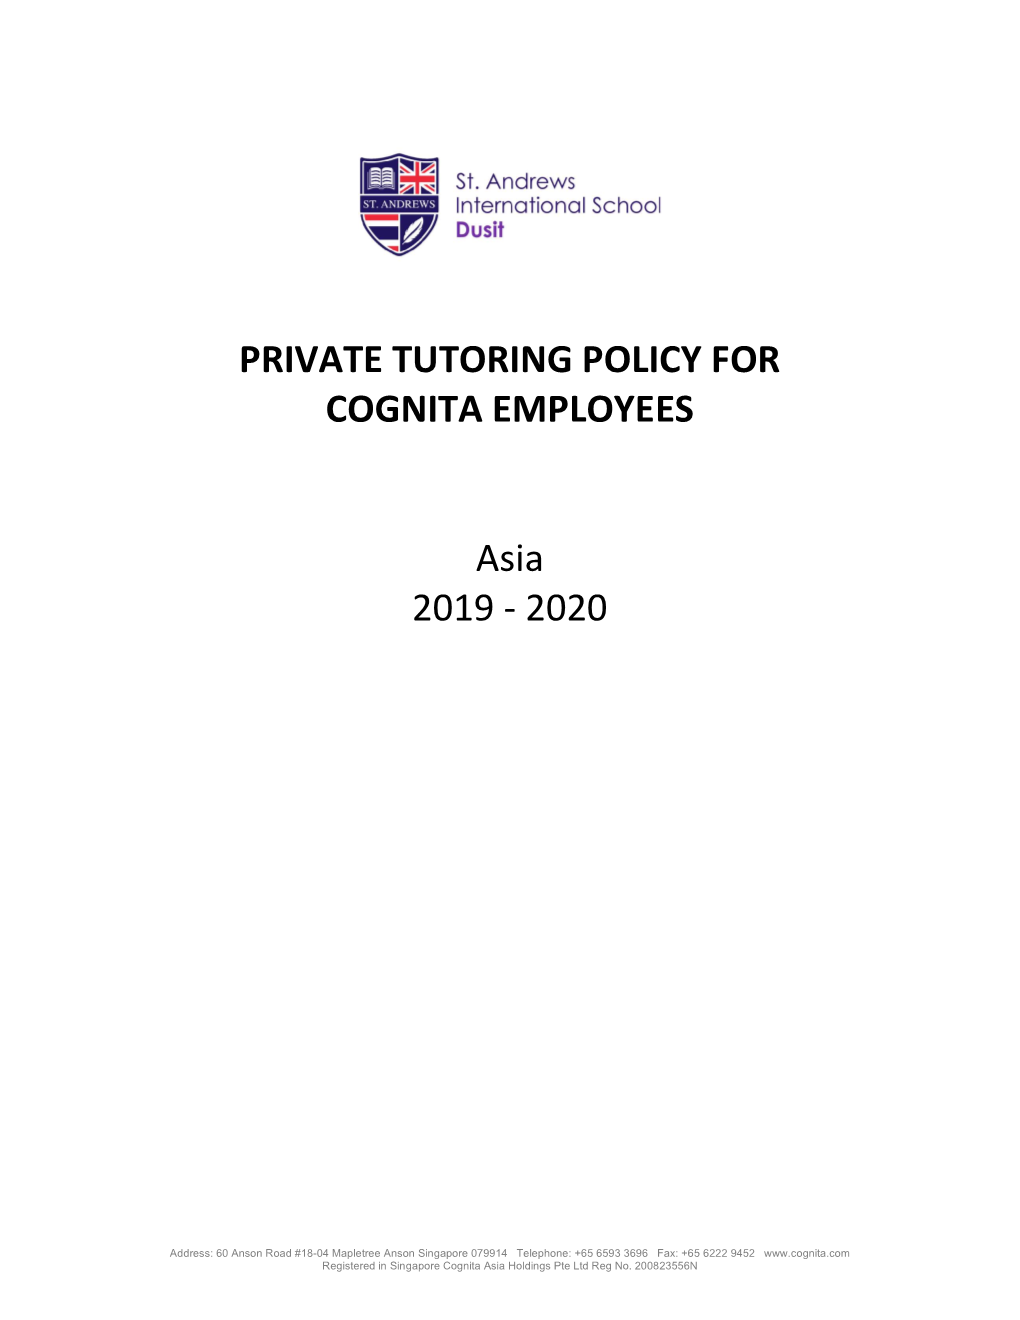 PRIVATE TUTORING POLICY for COGNITA EMPLOYEES Asia 2019